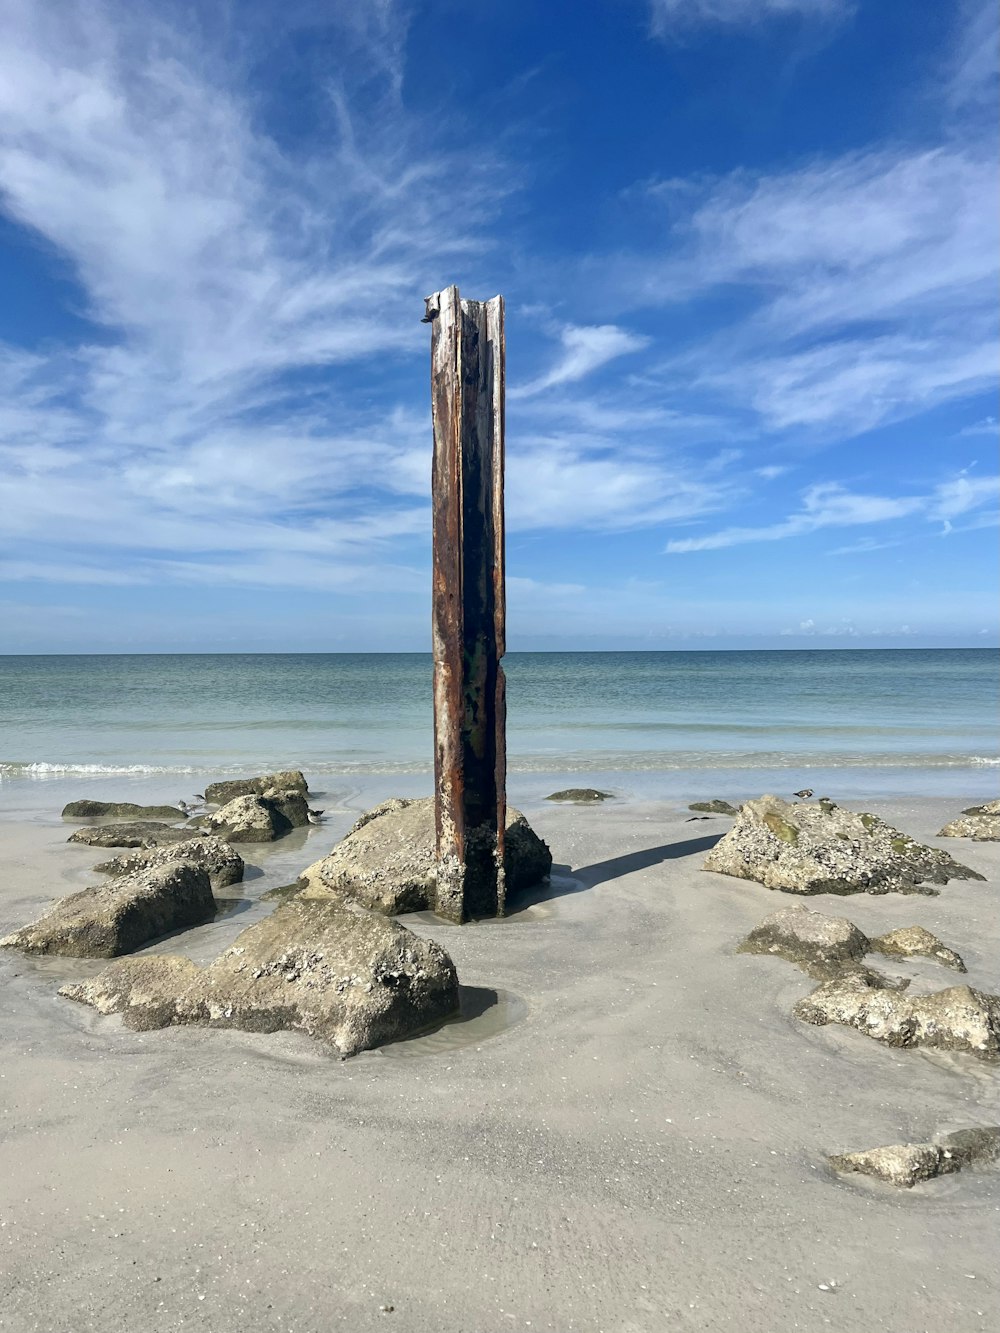 a wooden pole sticking out of the sand on a beach